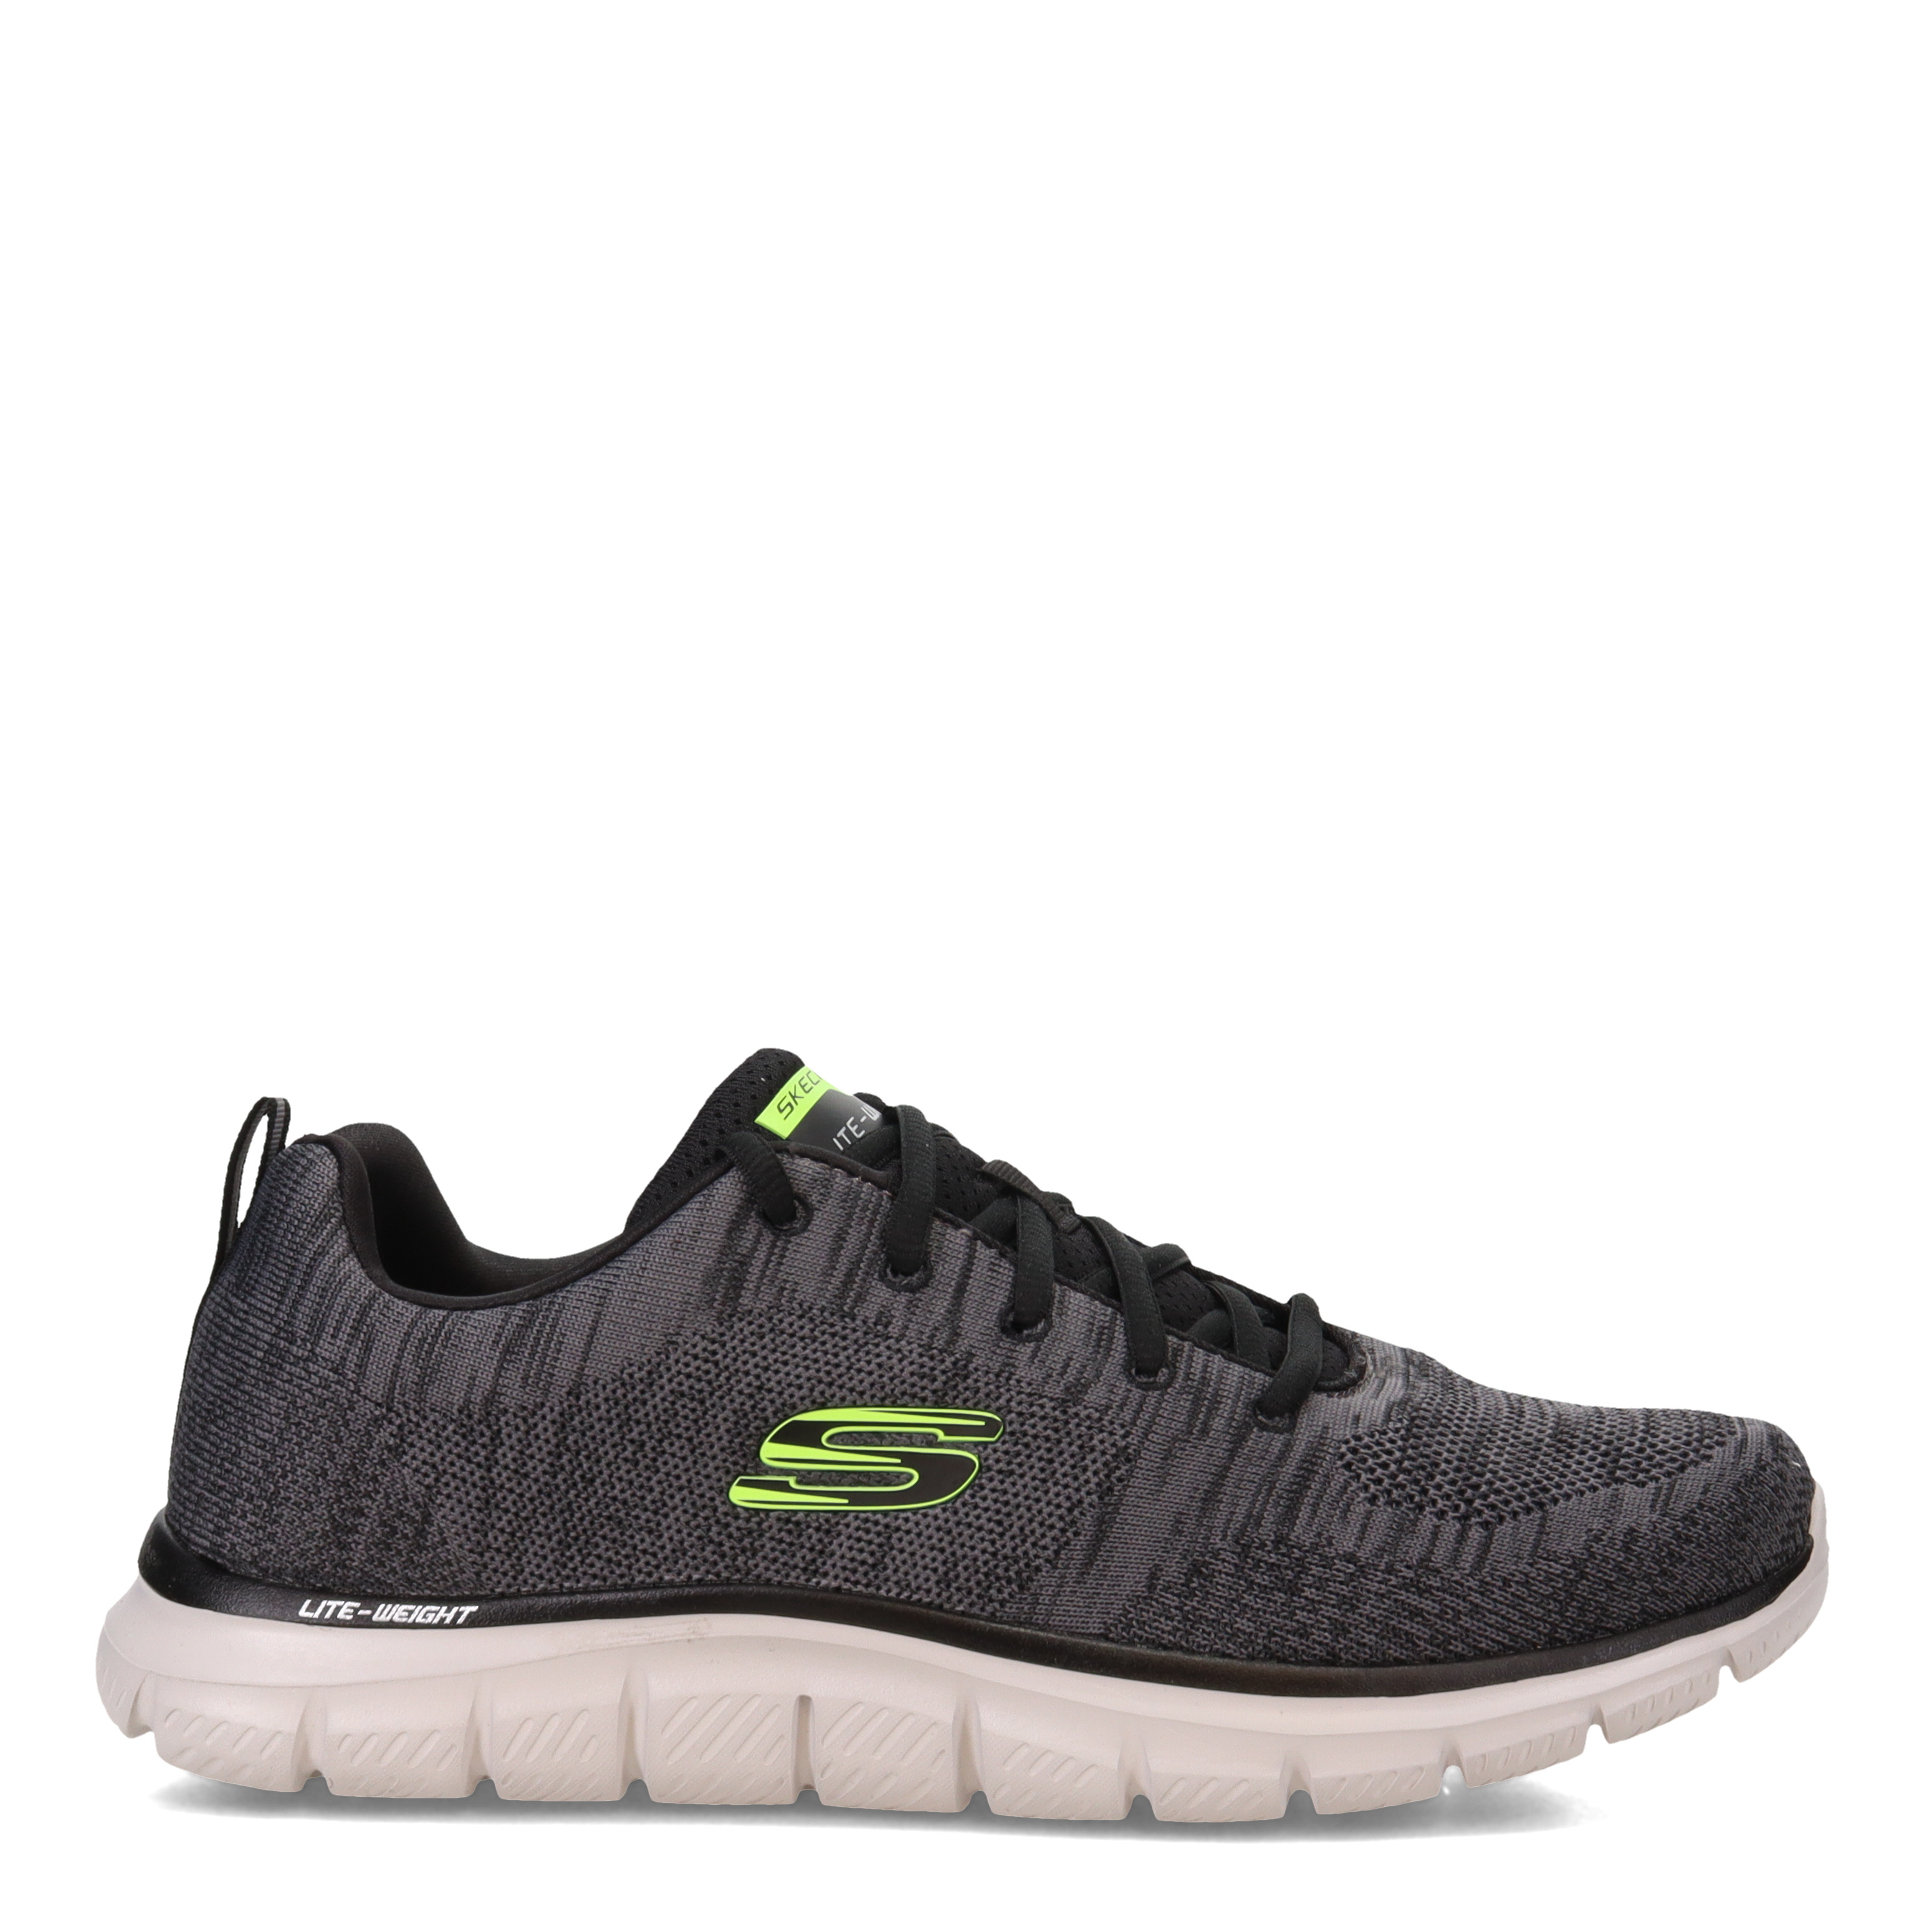 Men's Skechers, Track - Front Runner Sneaker 232298-CCBK Charcoal  Fabric-And-Syn | eBay